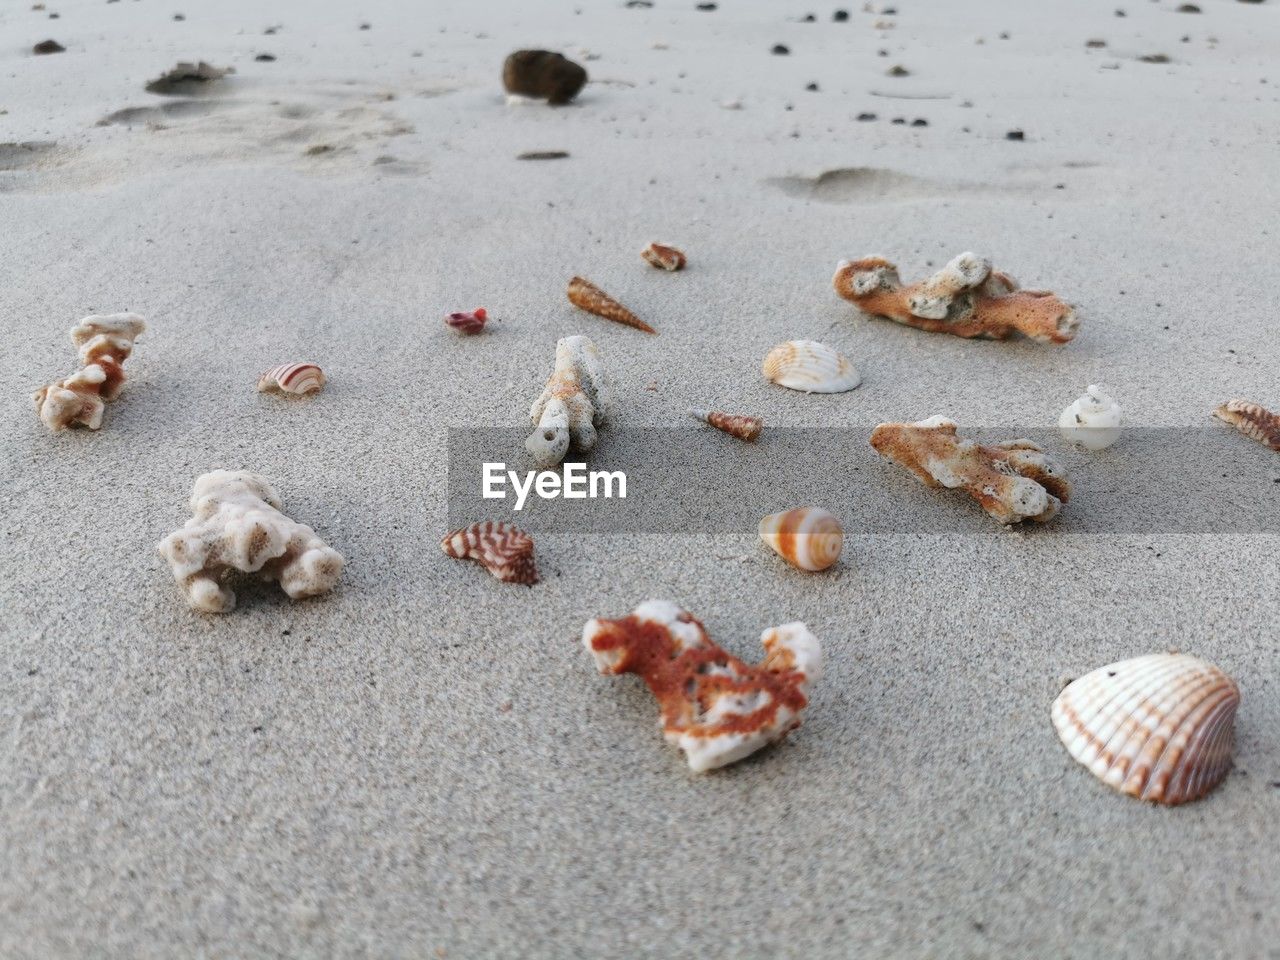 shell, beach, sand, land, sea, nature, no people, animal, animal wildlife, seashell, high angle view, day, animal themes, water, animal shell, beauty in nature, wildlife, outdoors, group of animals, conch